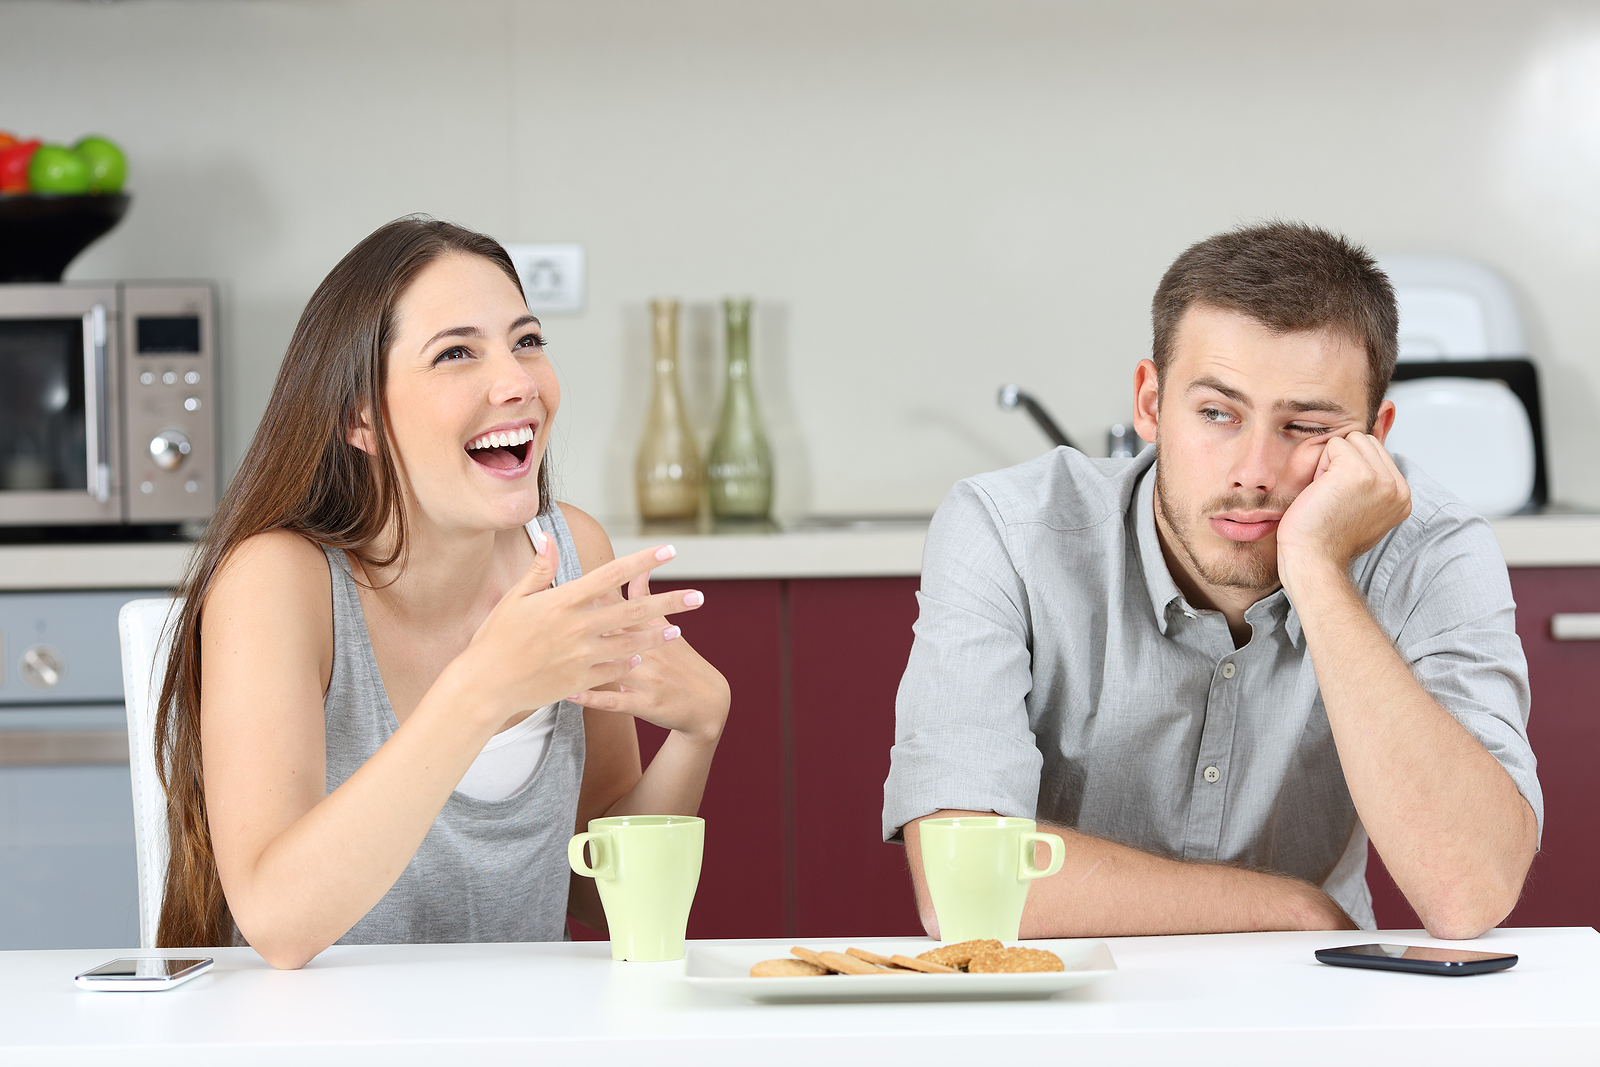 Photo of a young white man and woman wearing gray shirts and talking in a kitchen. She is laughing while he is looking annoyed at her.